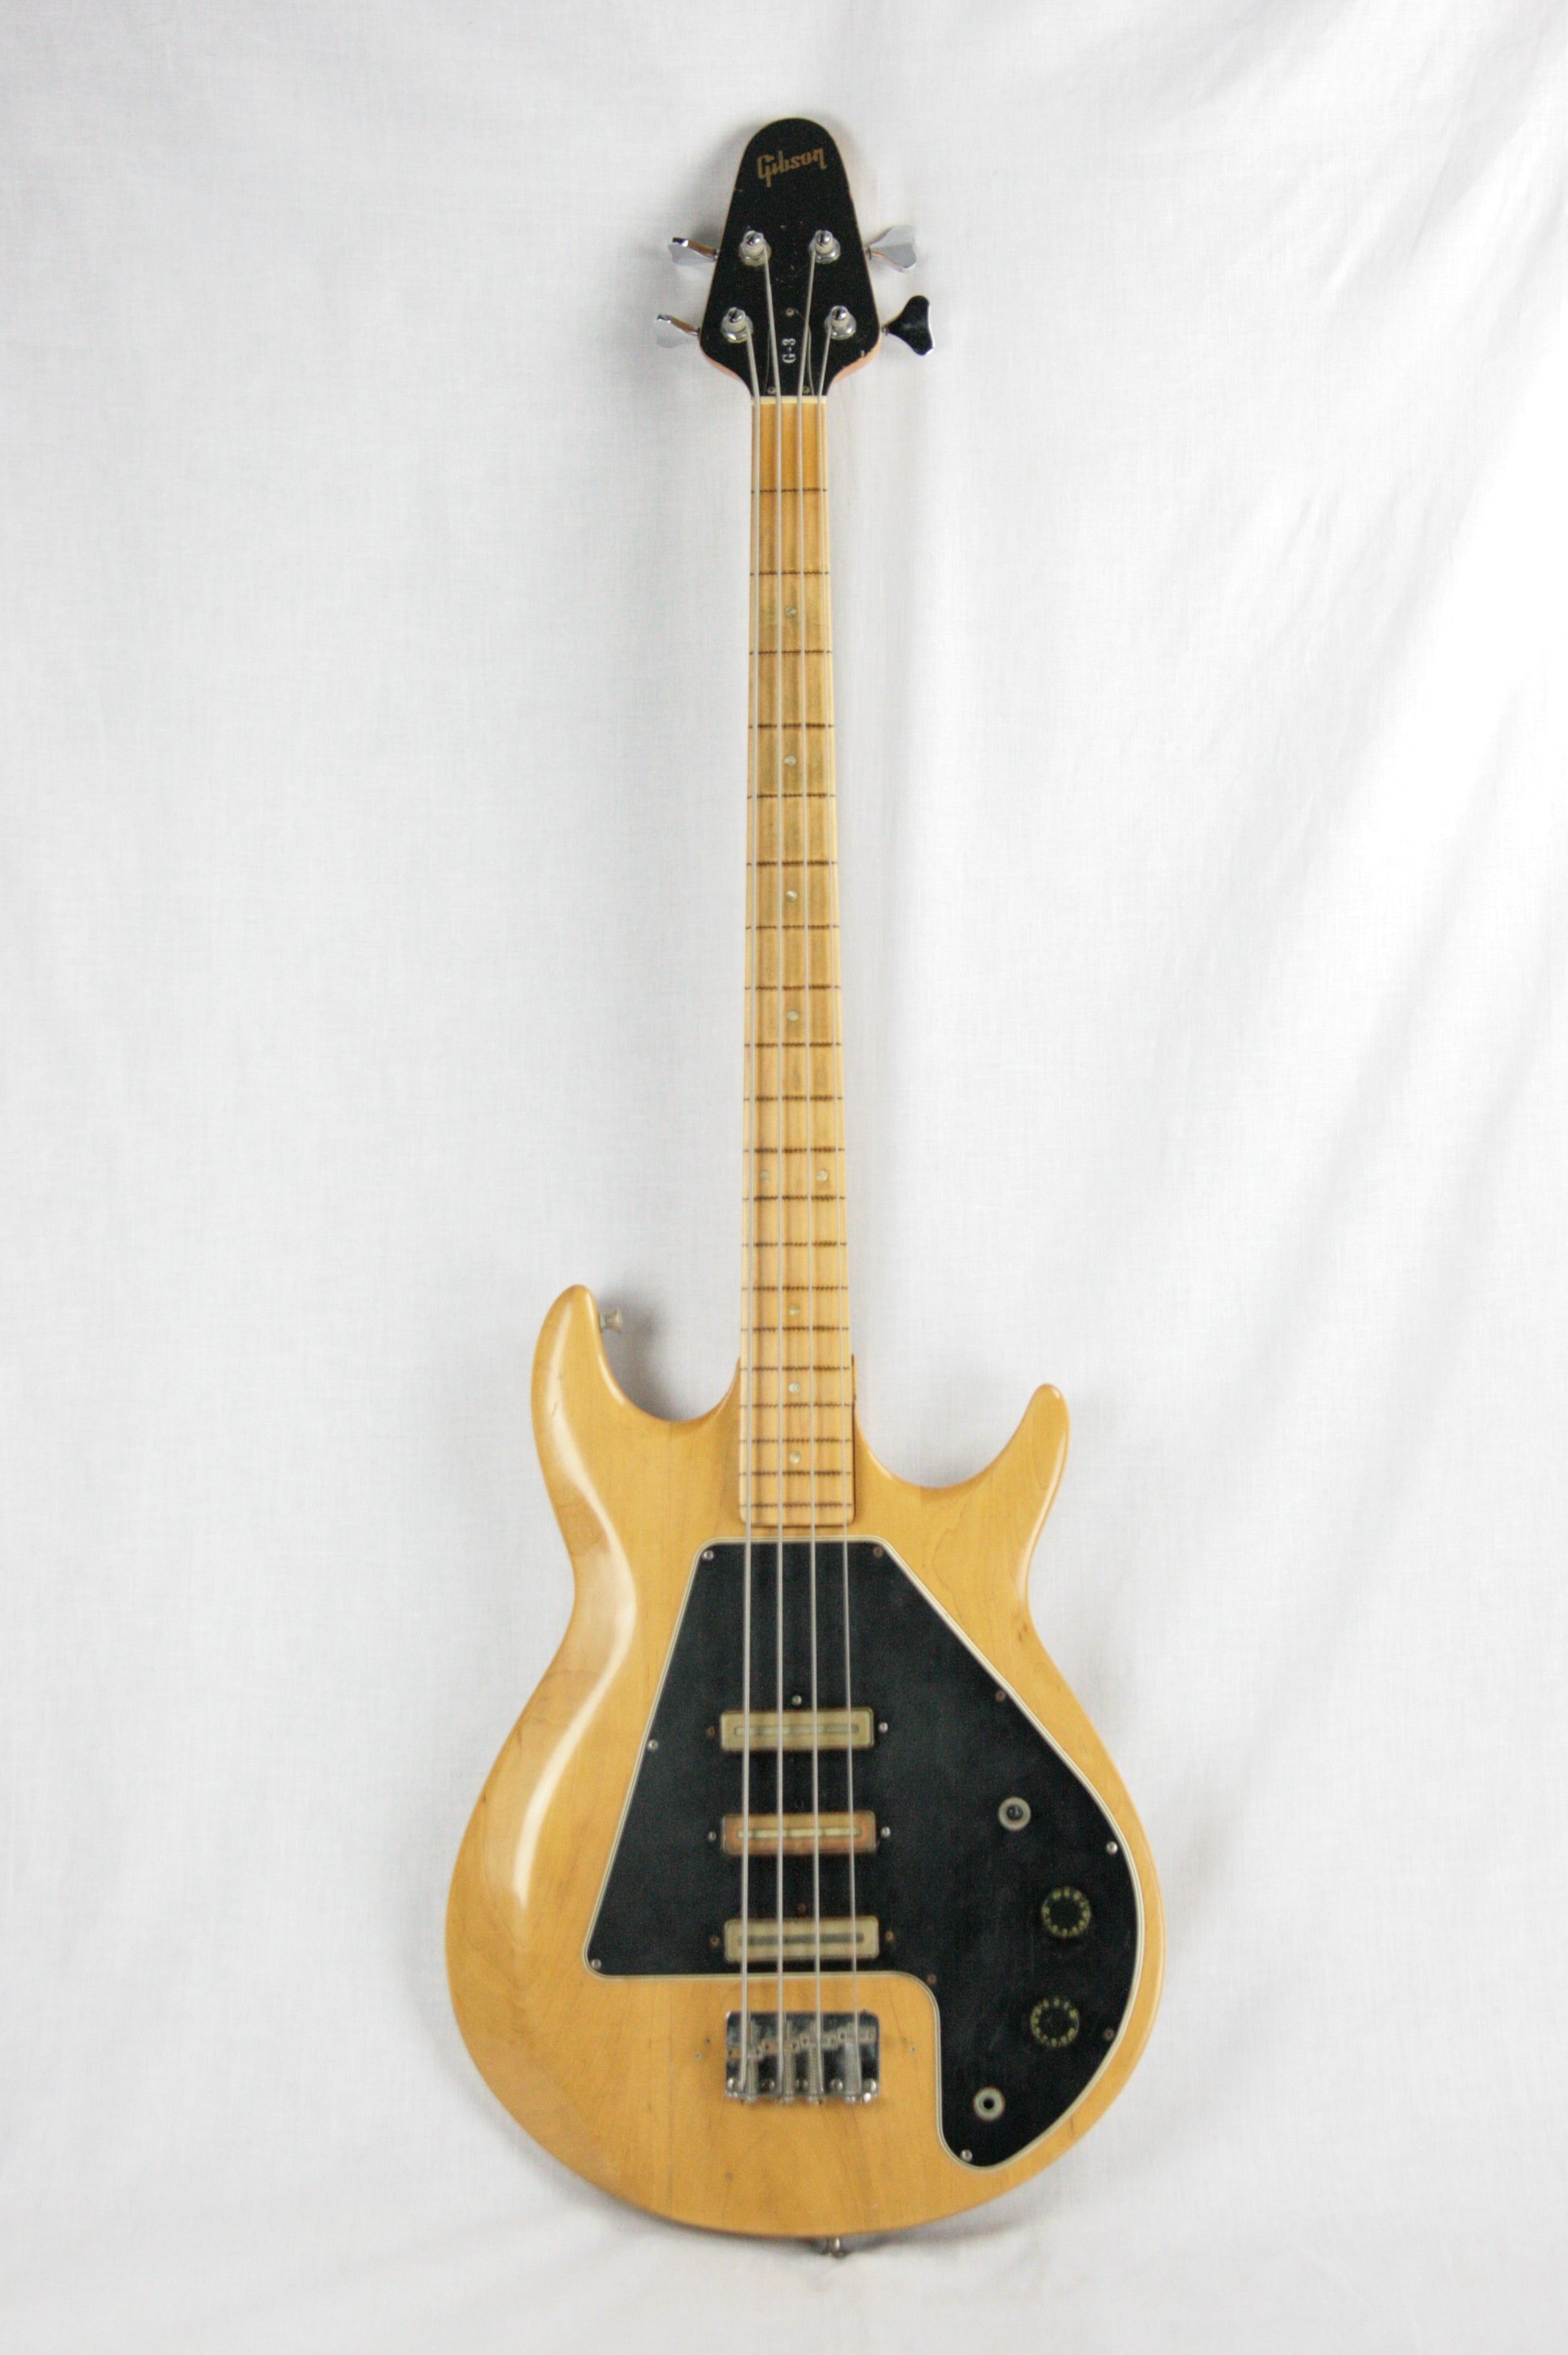 *SOLD*  PROJECT 1978 Gibson Grabber G-3 Fretless Electric Bass Guitar in Natural